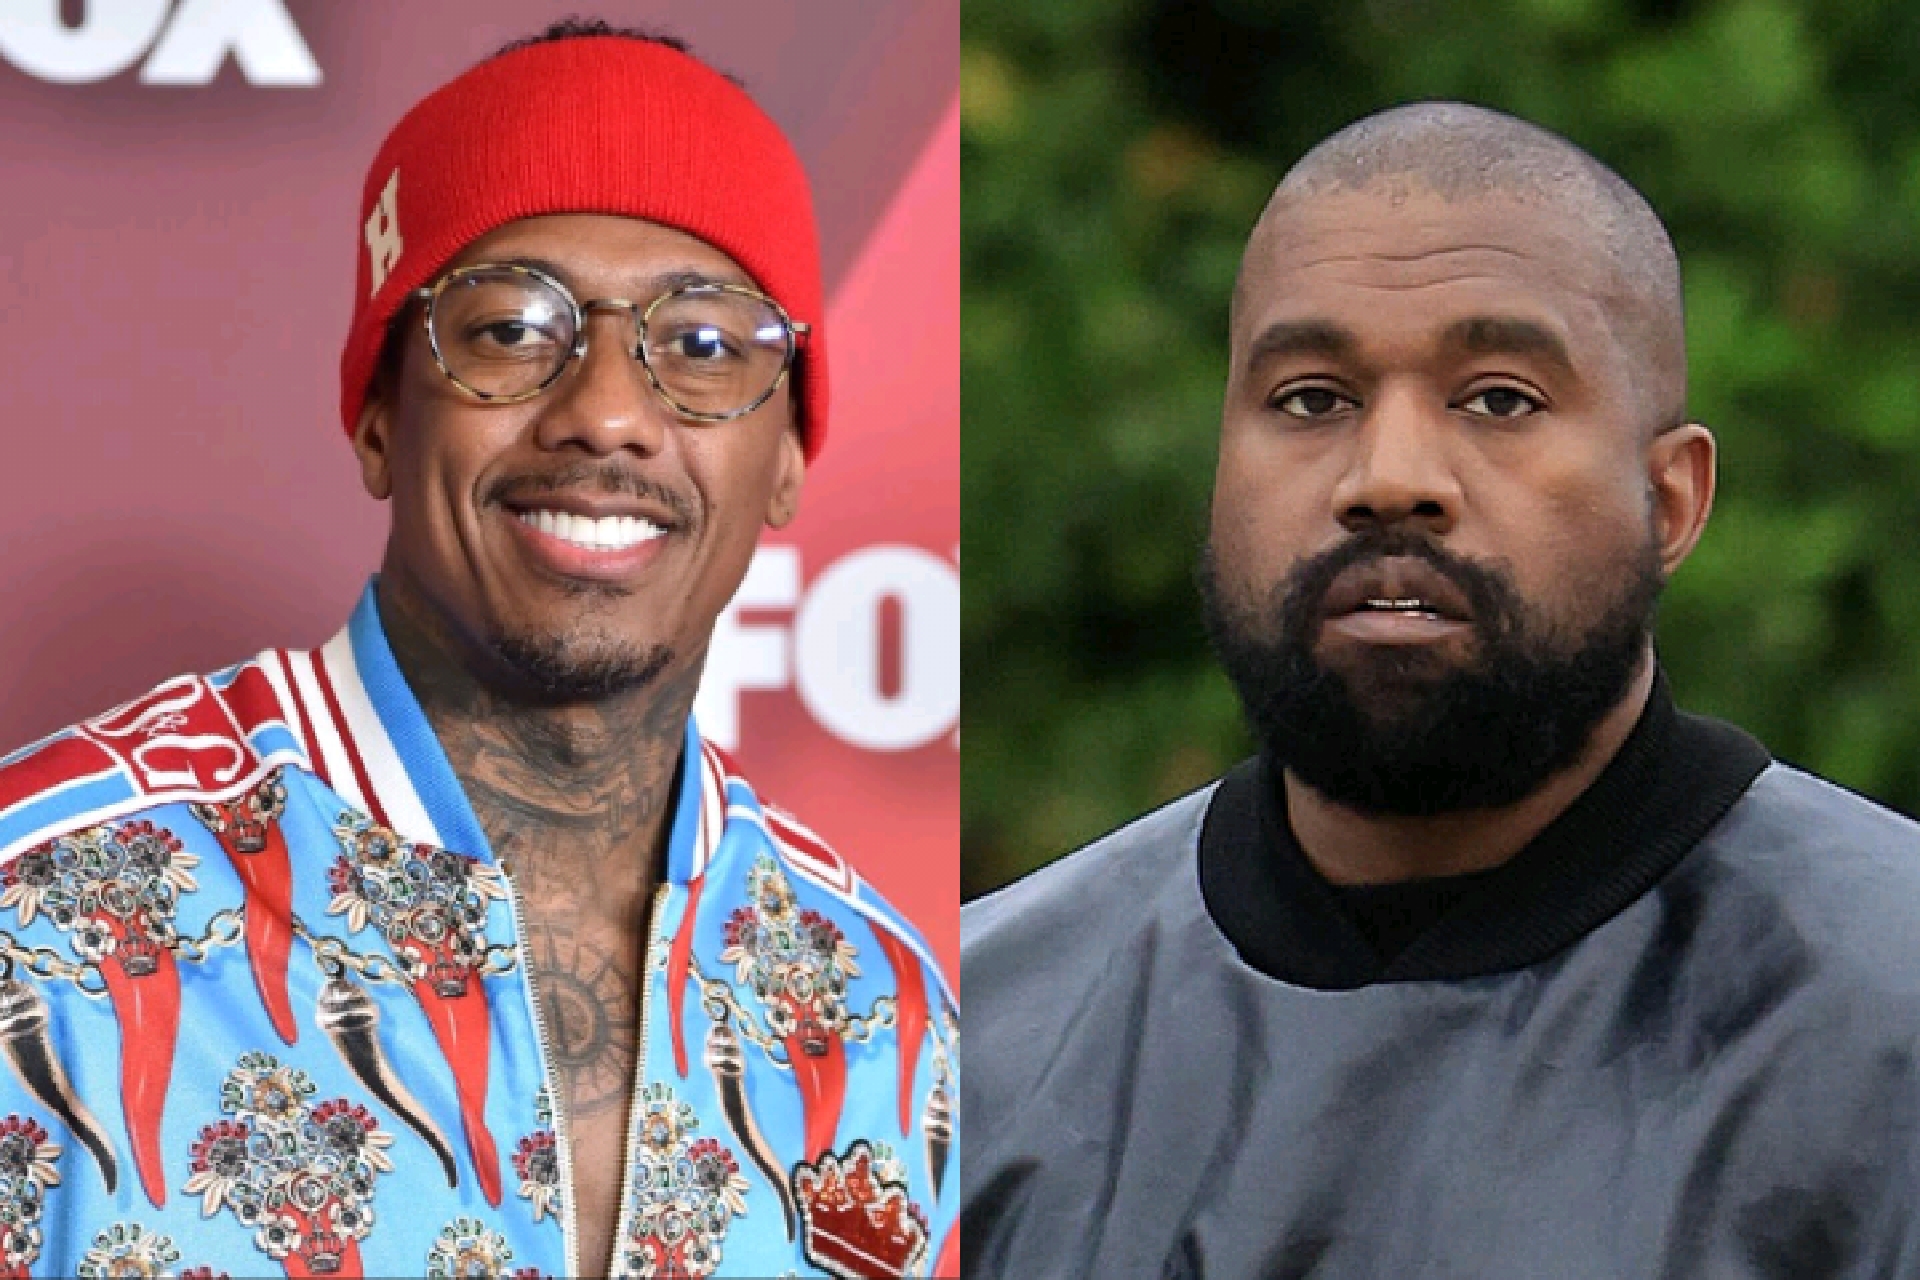 Nick Cannon Strongly Argues that Kanye West Desperately Requires Help